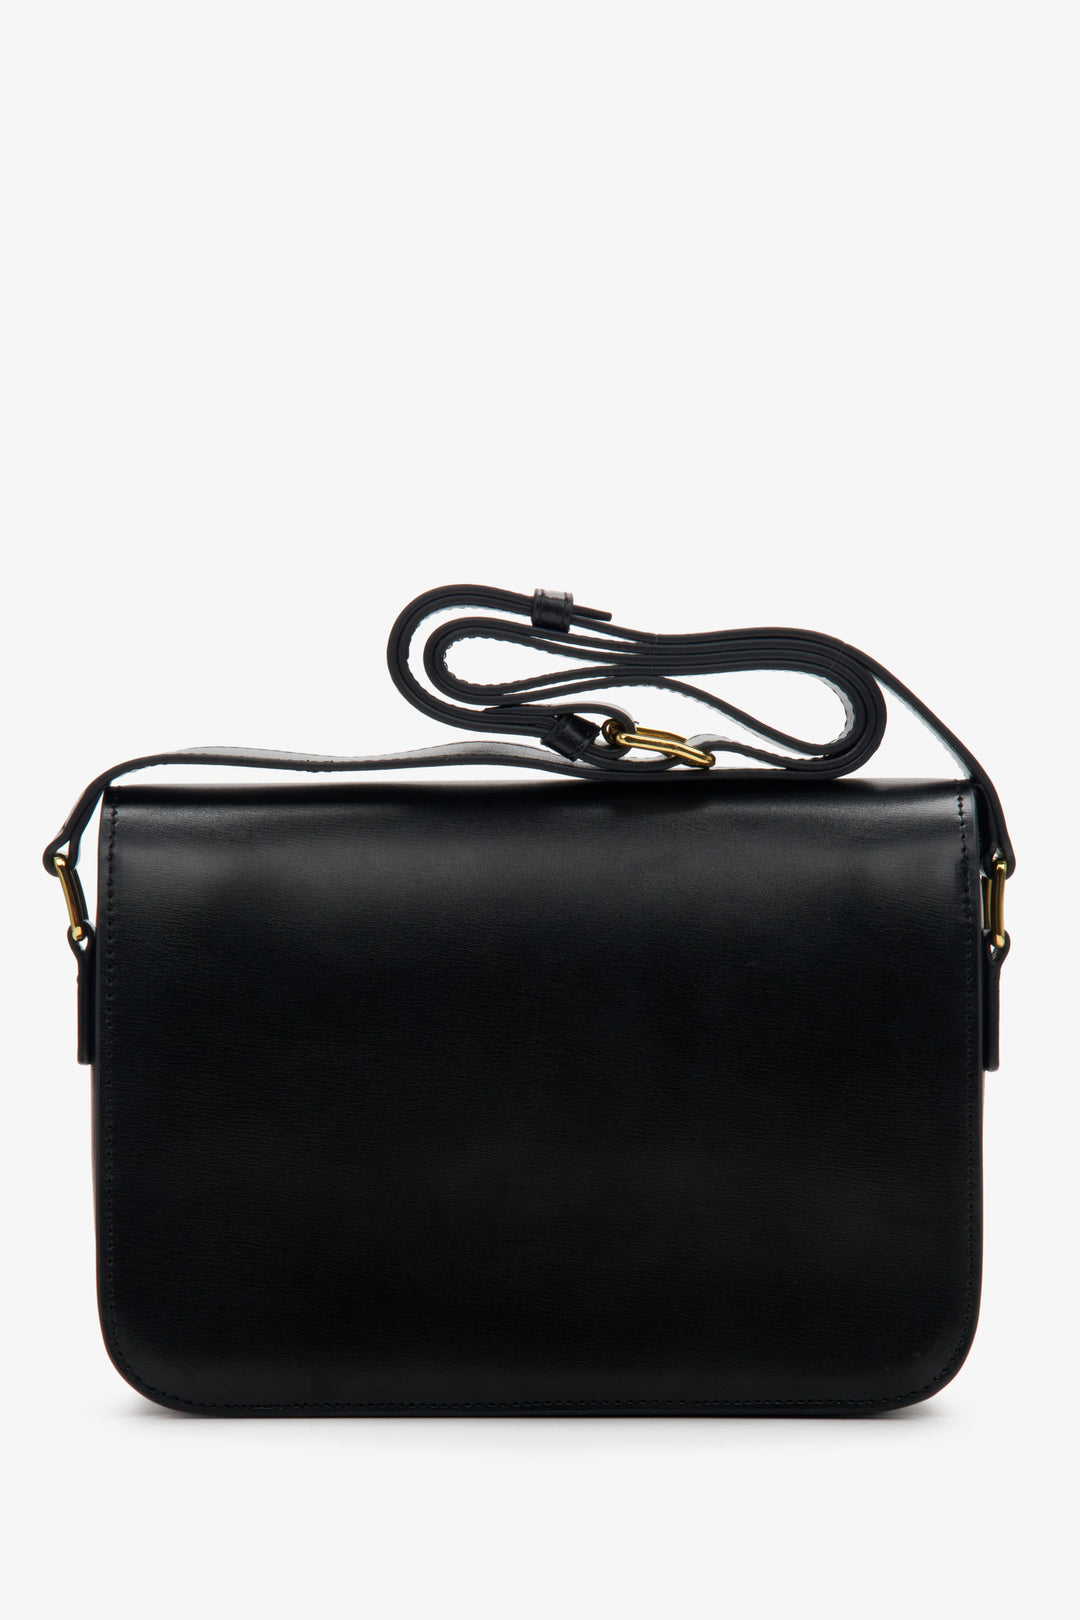 Women's small leather bag by Estro - back of the bag.